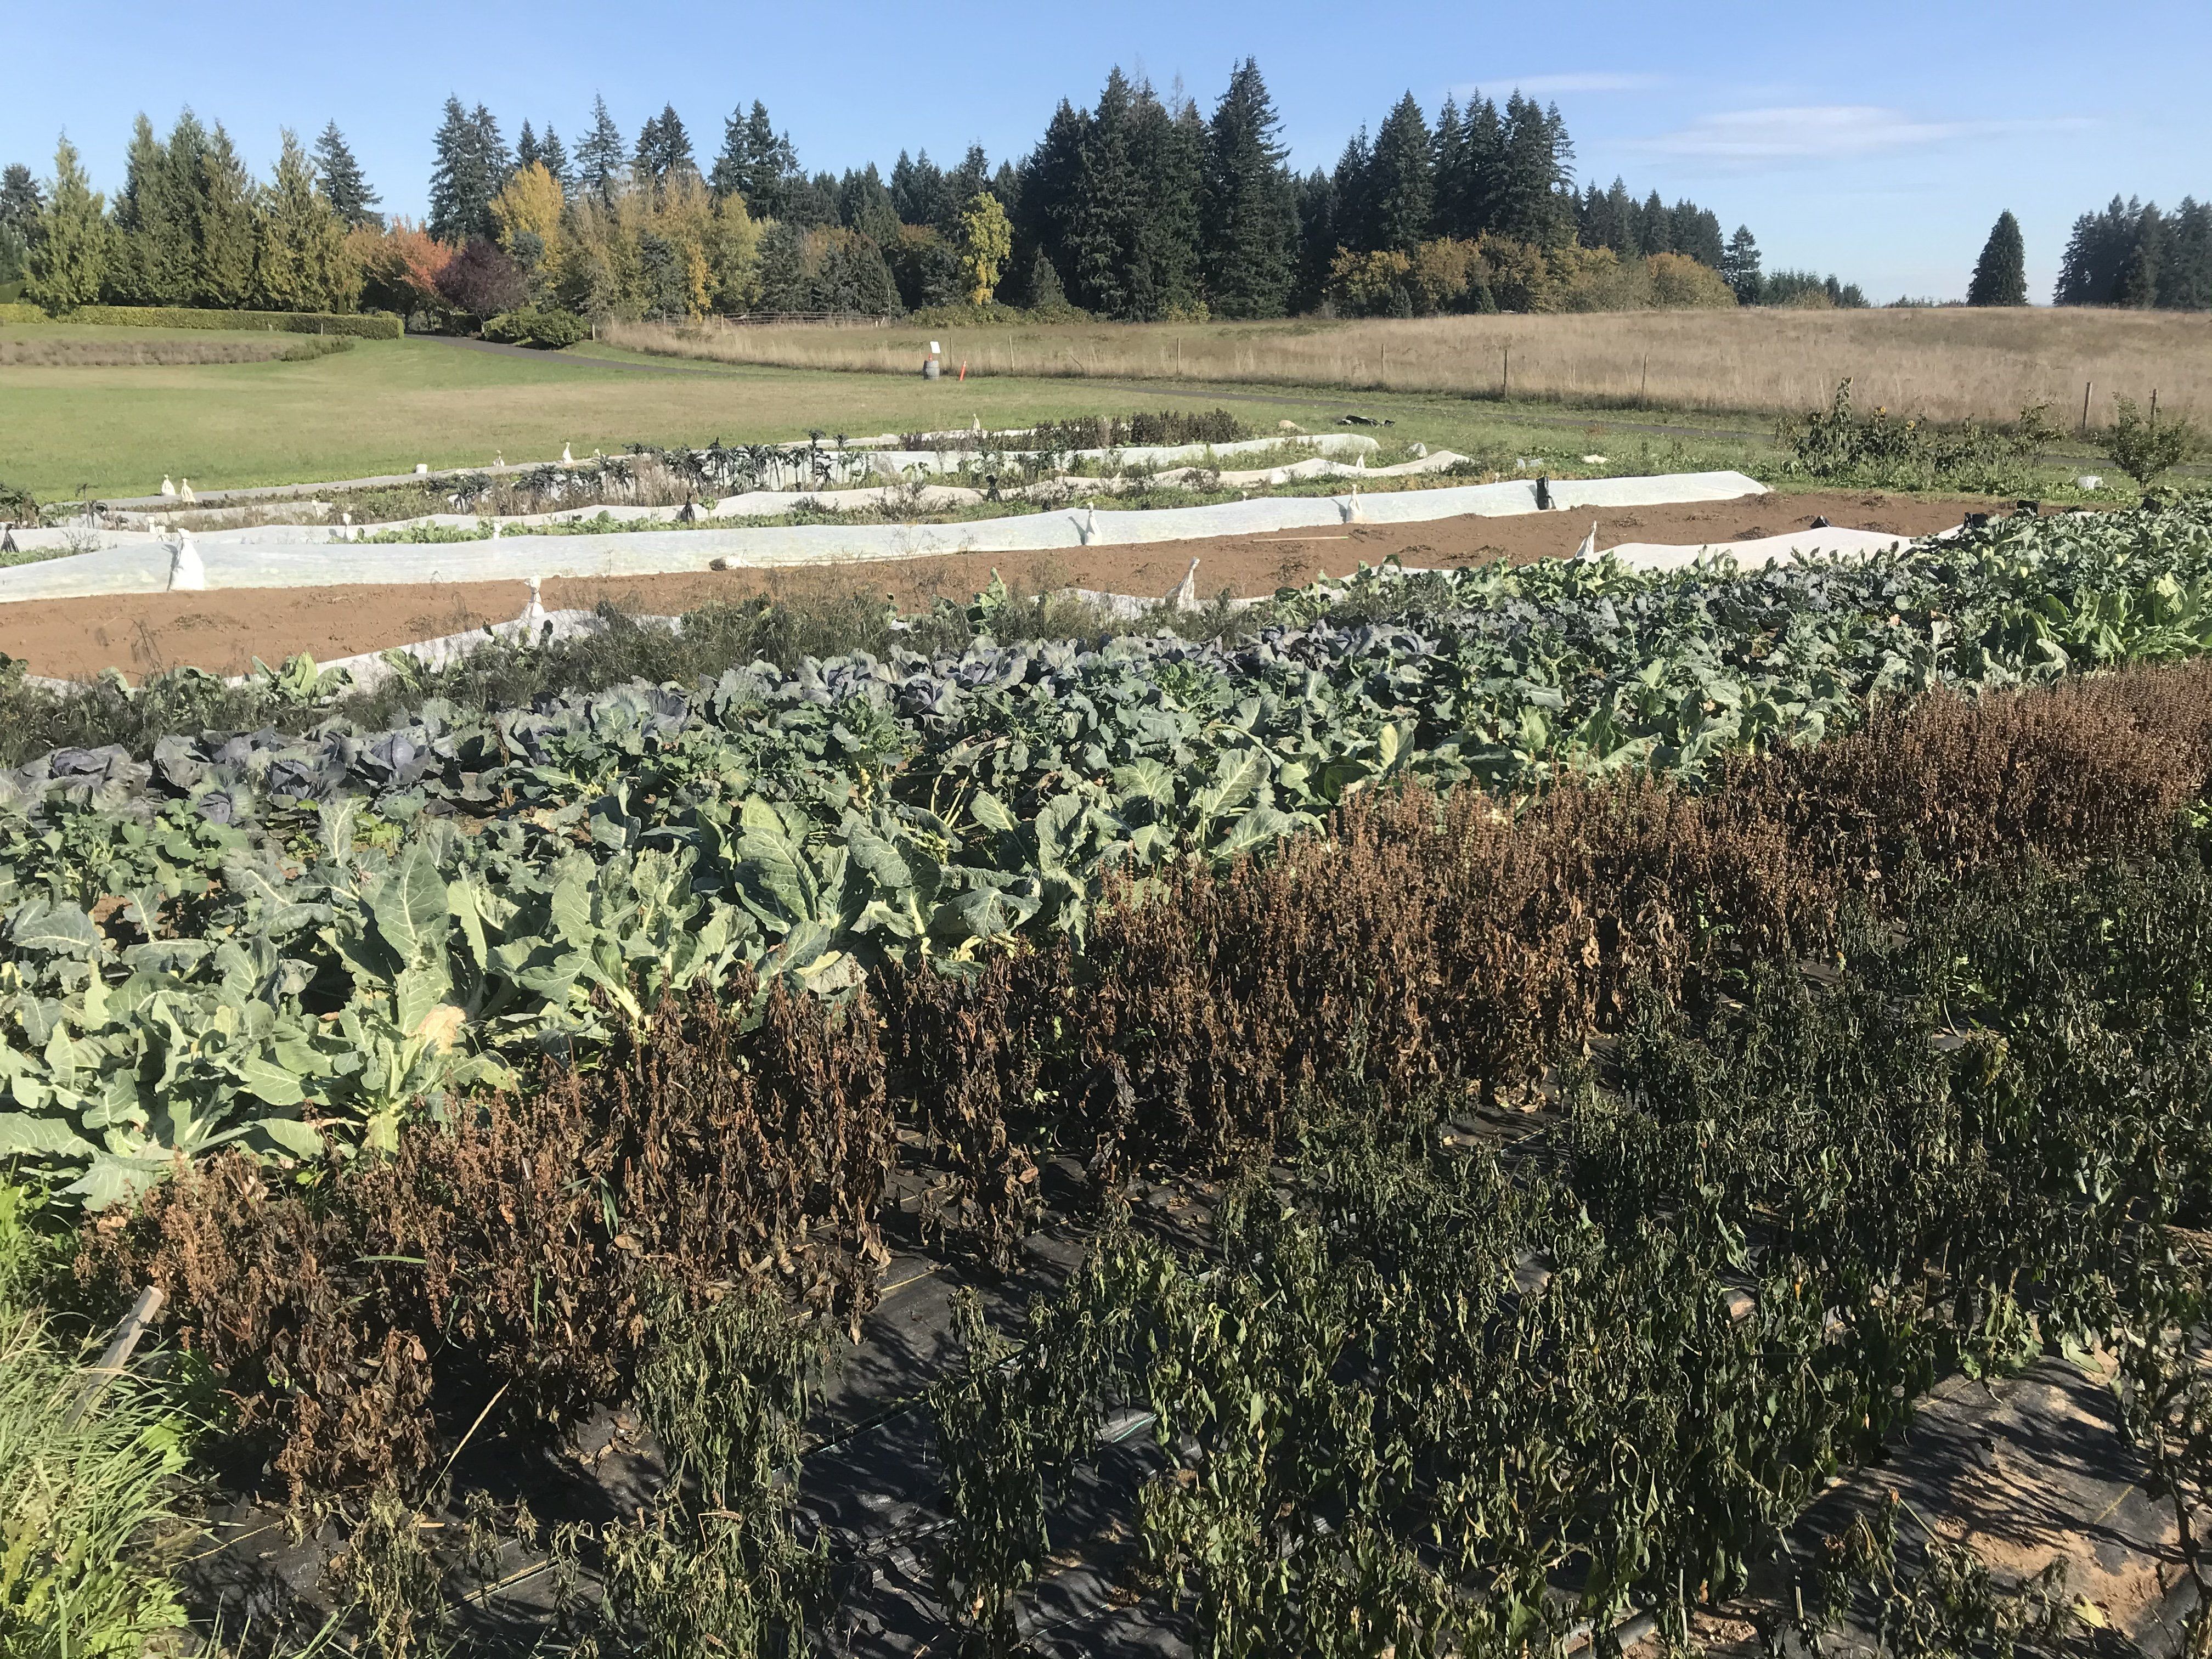 Previous Happening: Farm Happenings for October 29, 2020